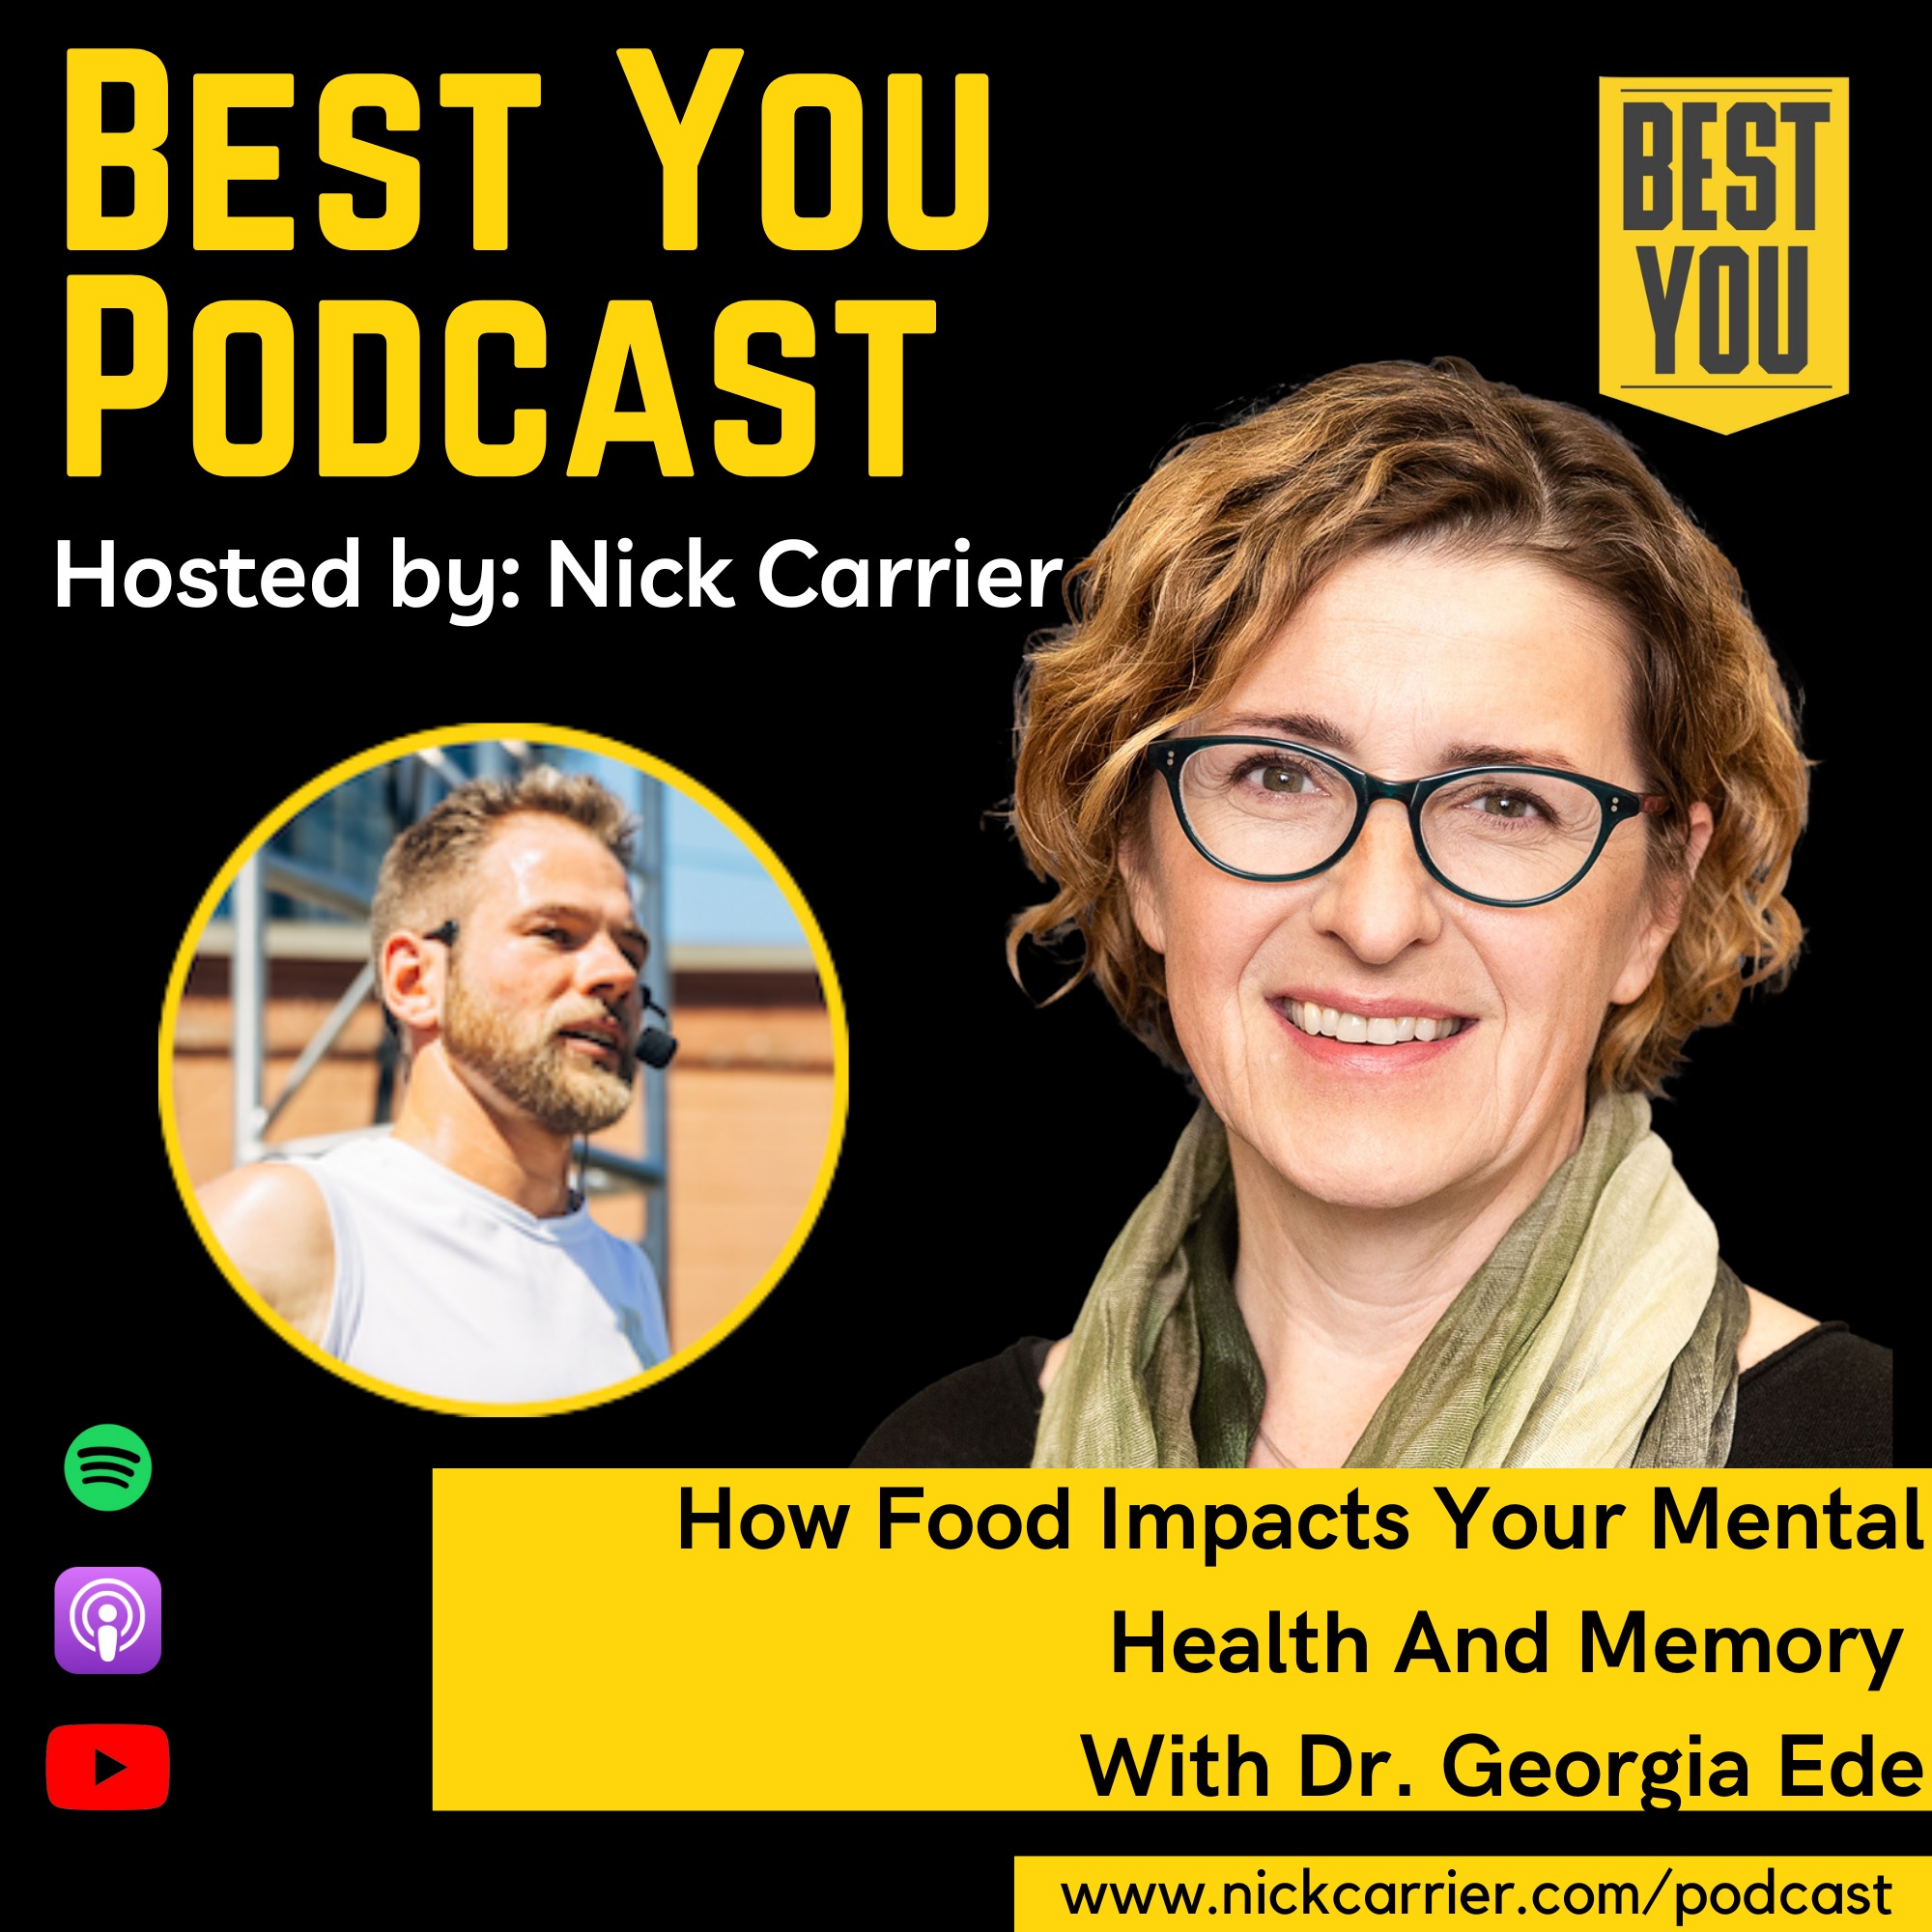 How Food Impacts Your Mental Health And Memory With Dr. Georgia Ede